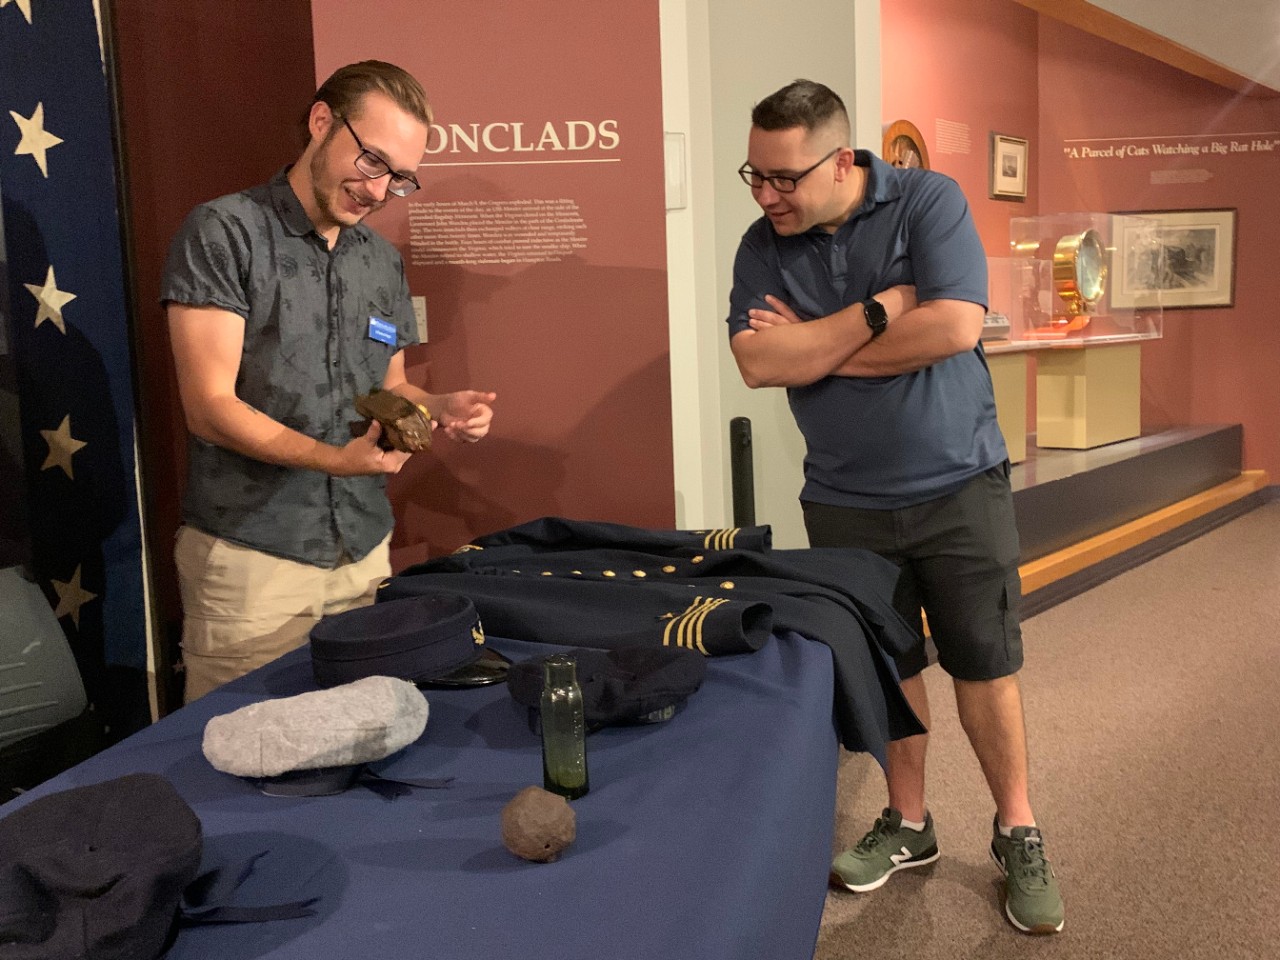 Volunteer staff with Civil War artifacts, teaching a visitor